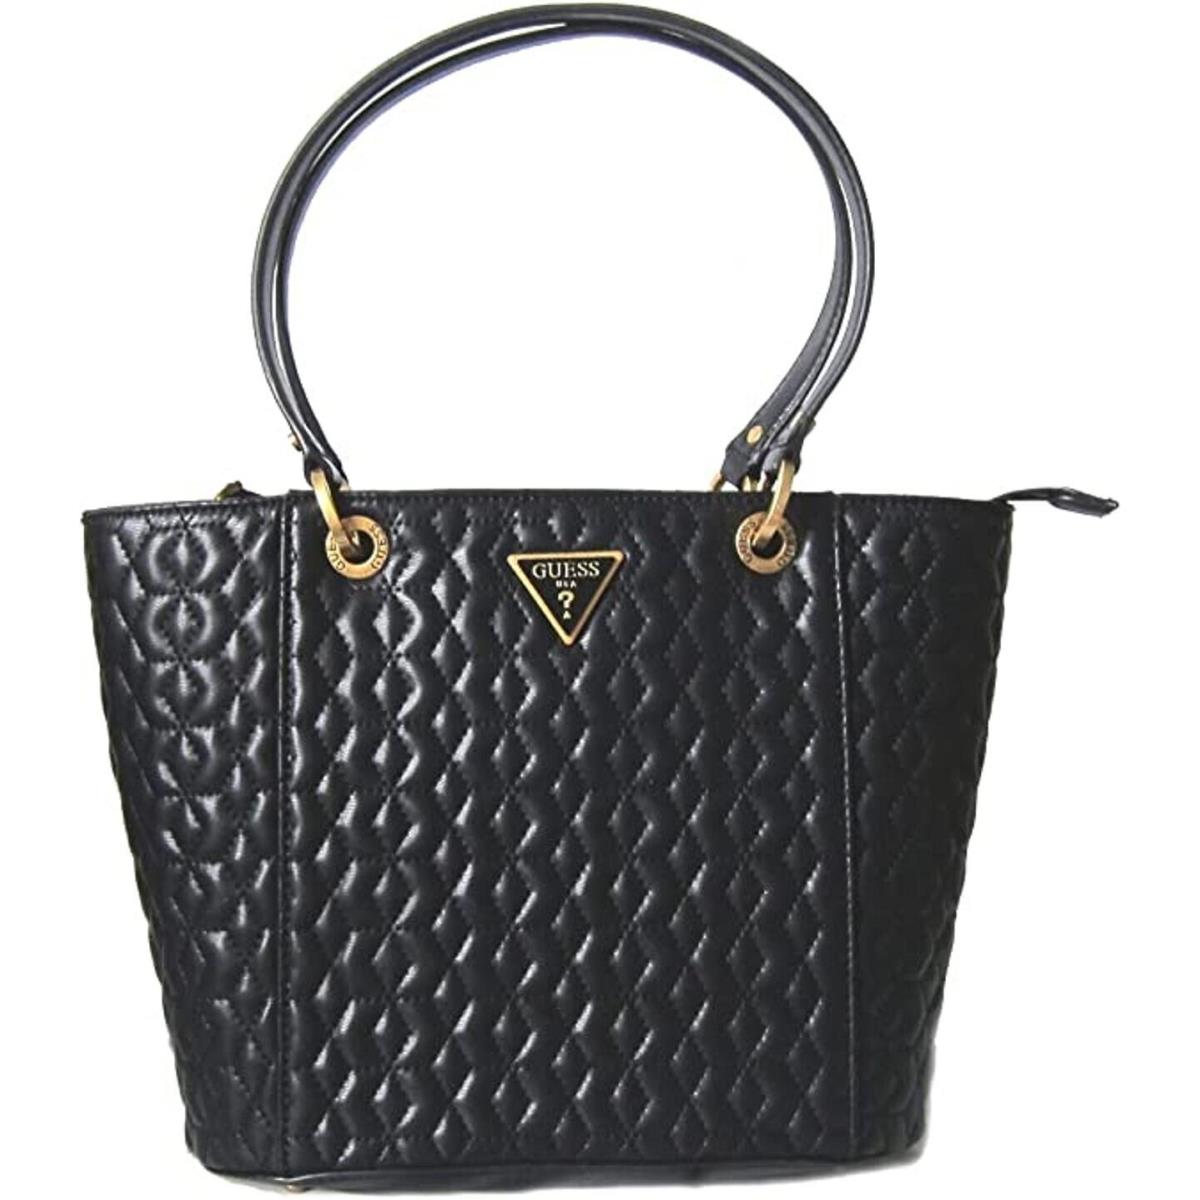 Guess Noelle Small Quilted Elite Tote Bag Black - Handle/Strap: Black, Hardware: Gold, Lining: Beige GUESS logo